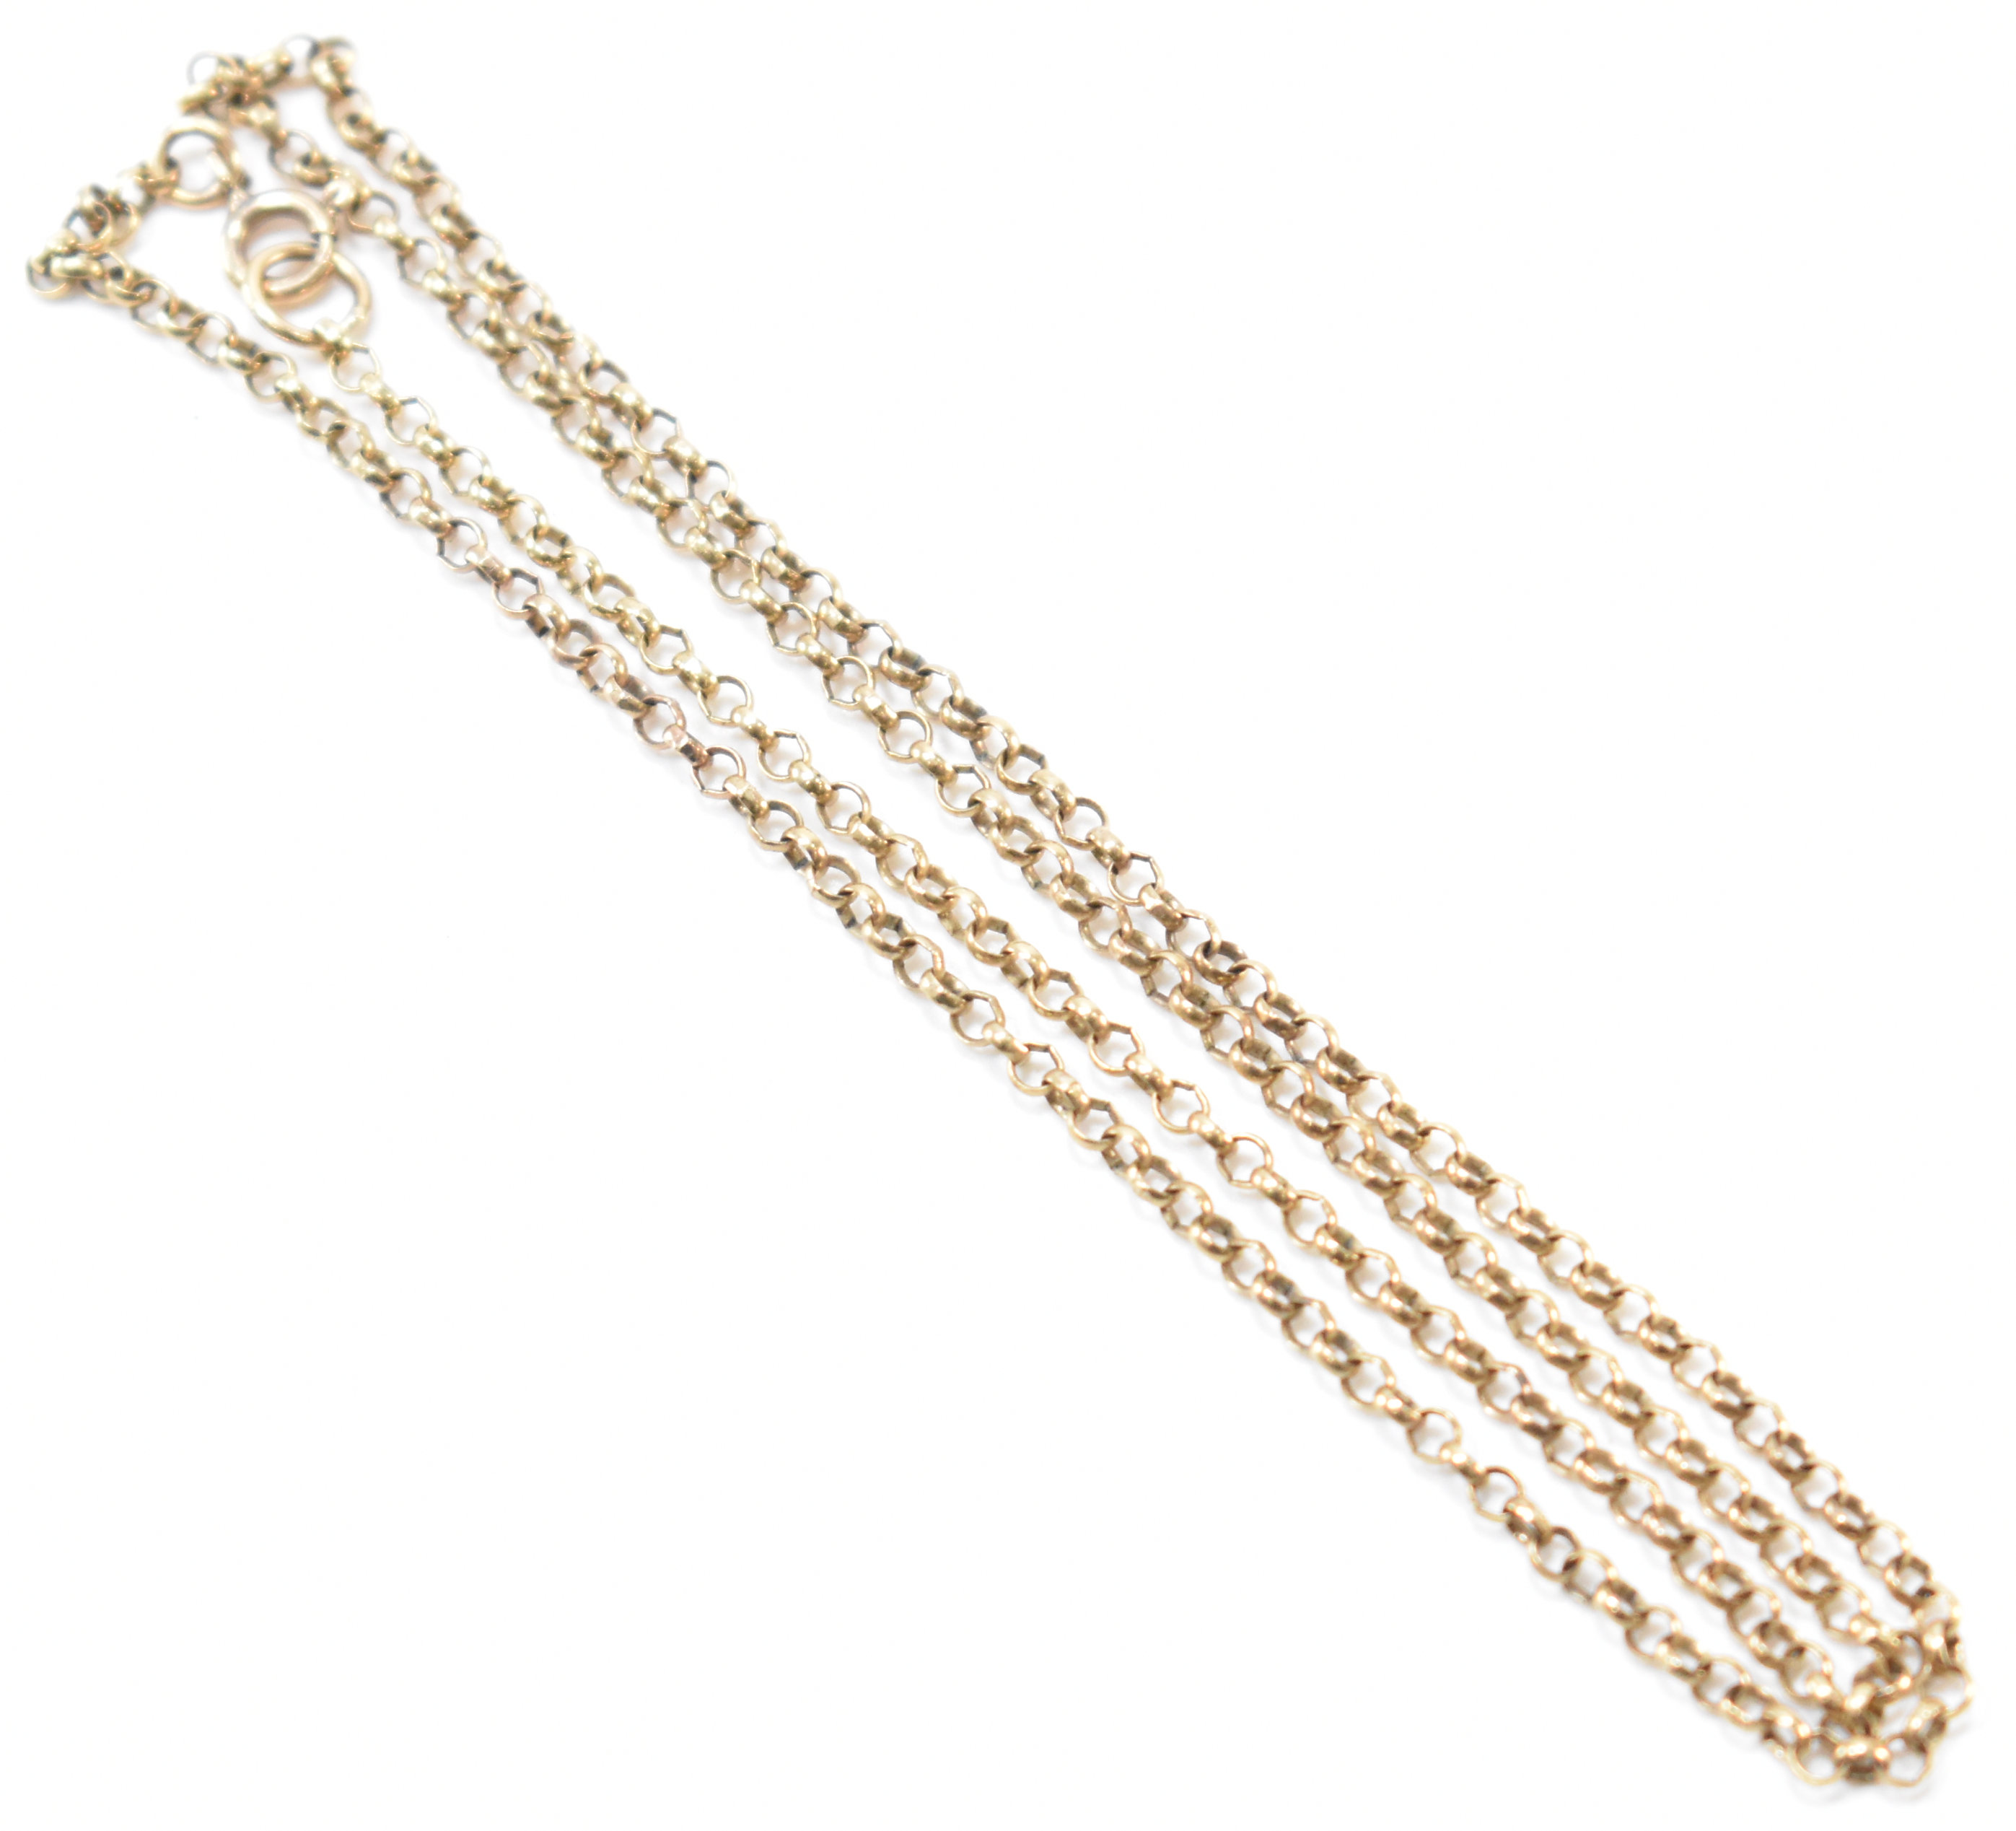 VINTAGE GOLD NECKLACE CHAIN - Image 3 of 4